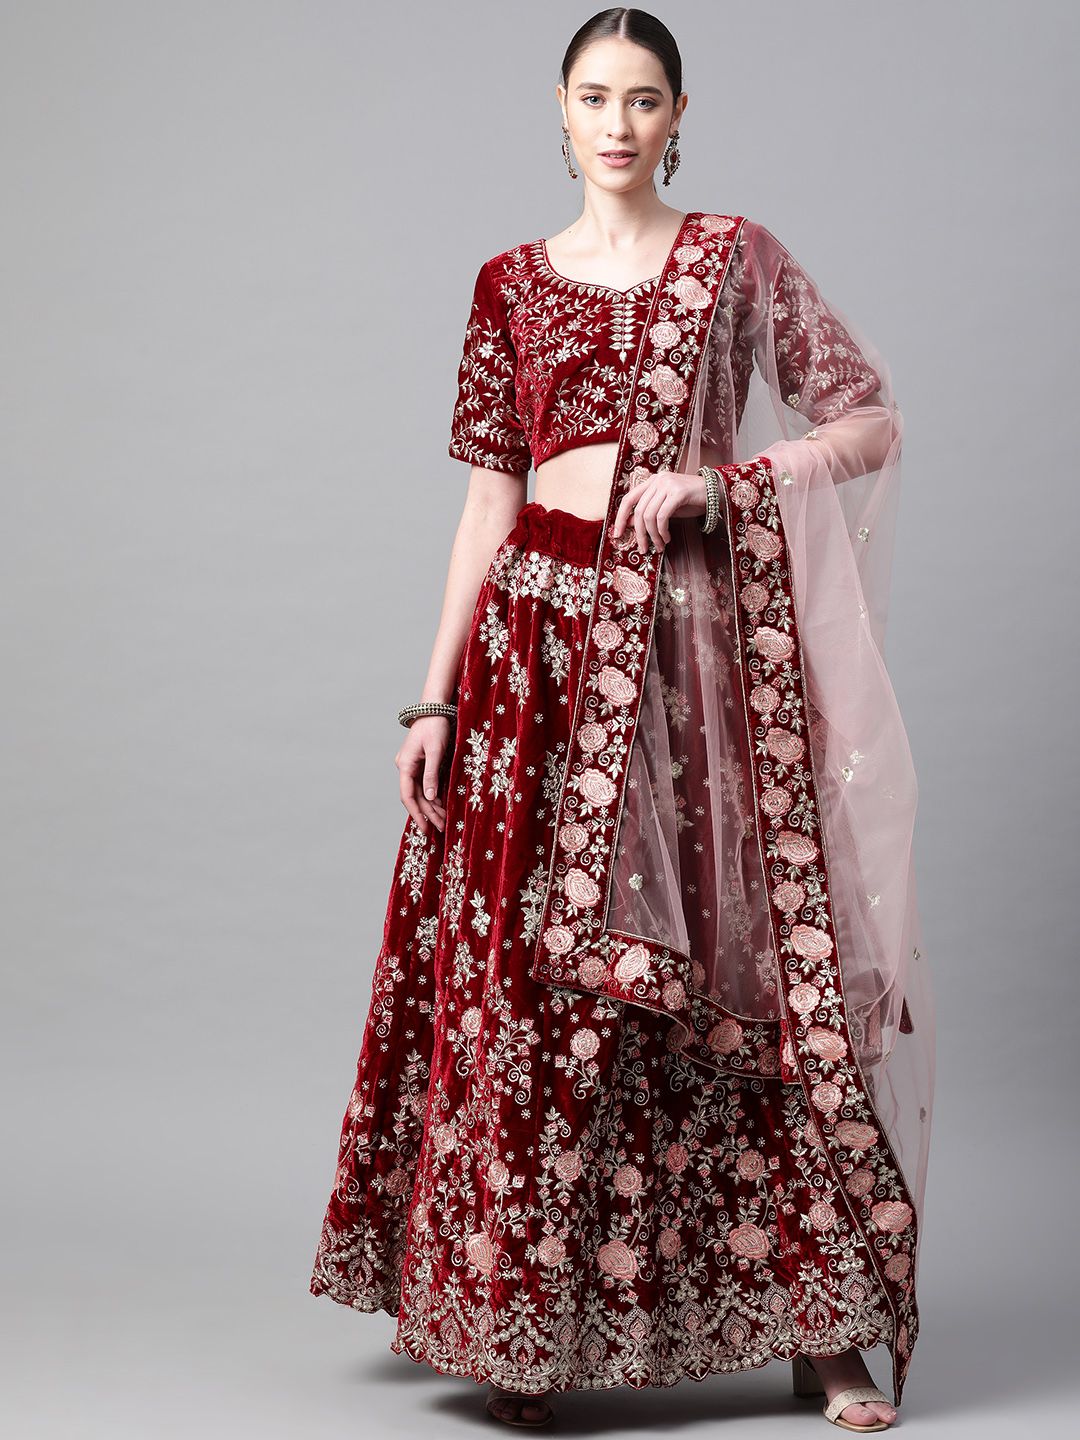 Readiprint Fashions Maroon Embroidered Semi-Stitched Lehenga & Blouse with Dupatta Price in India